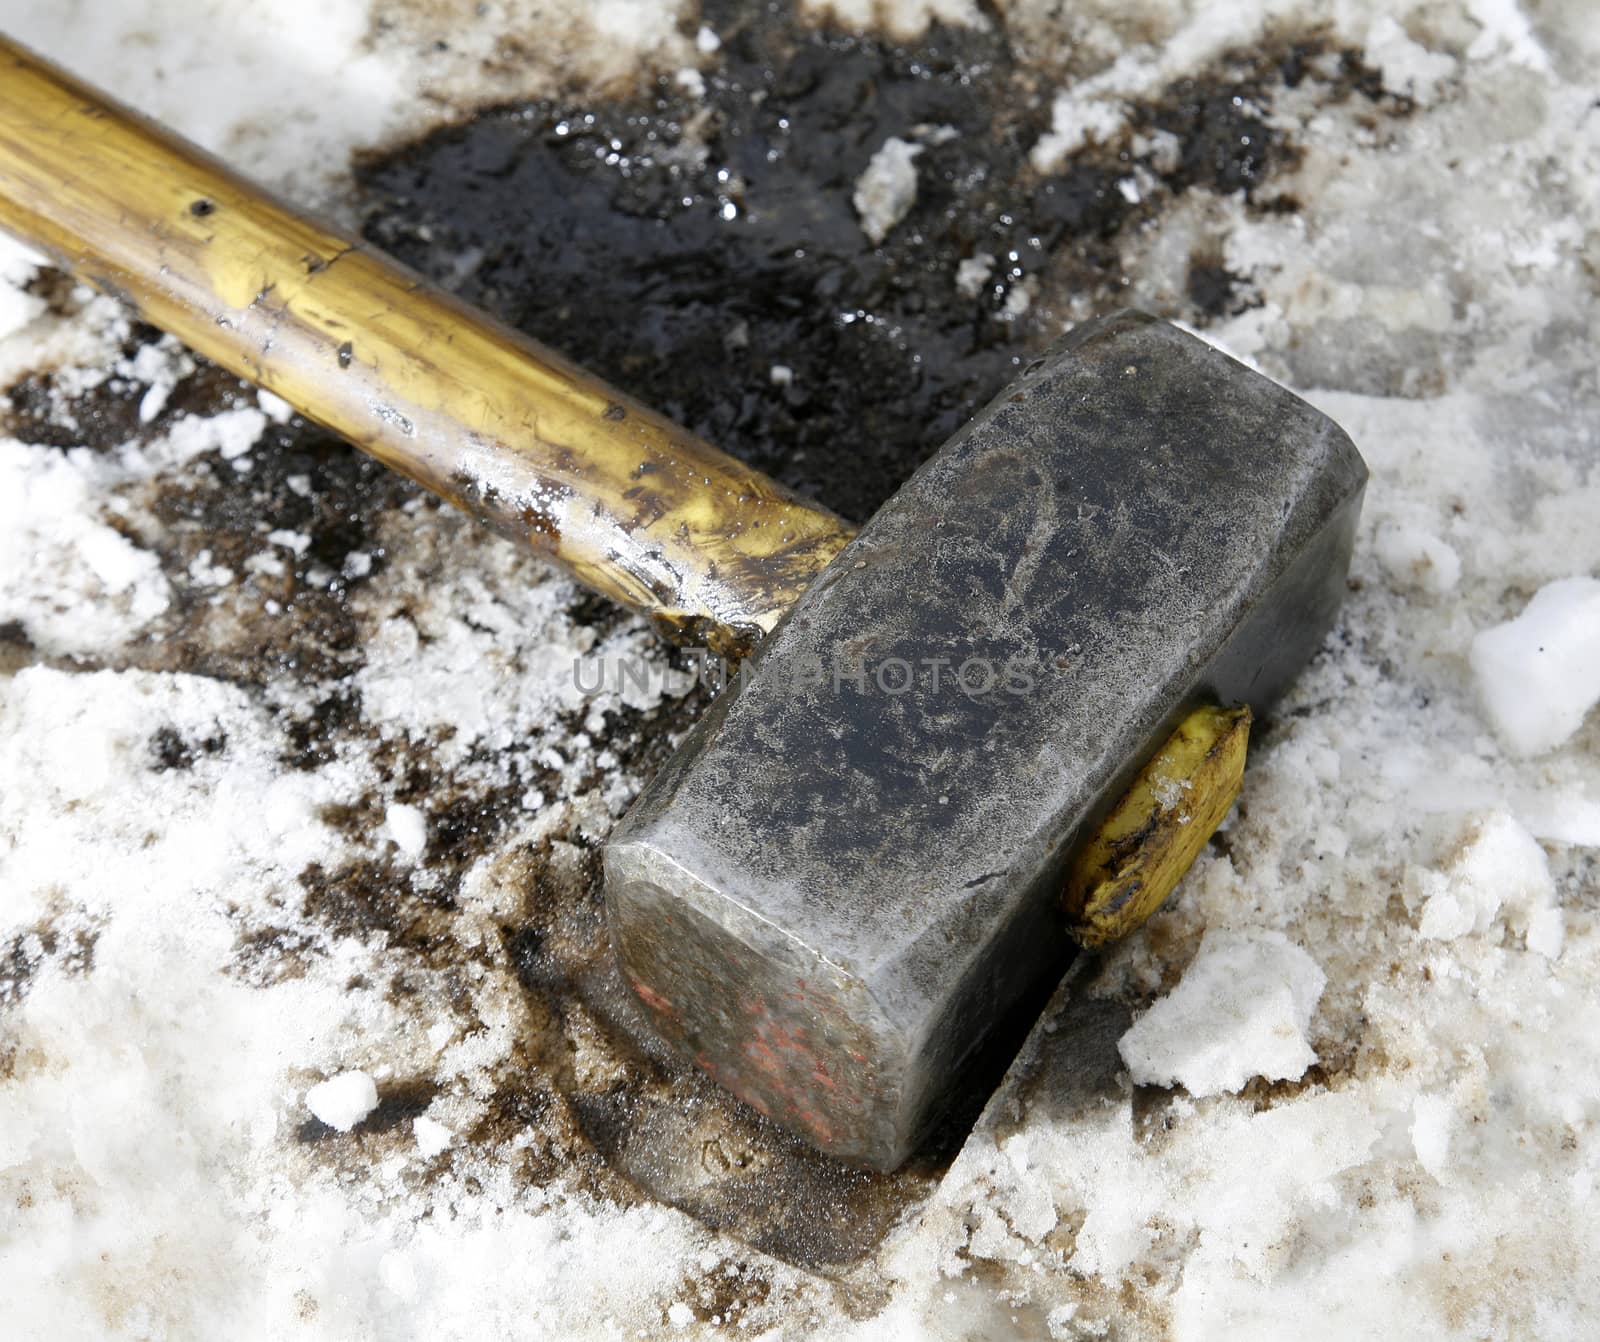 Sledgehammer covered in oil lies in the snow